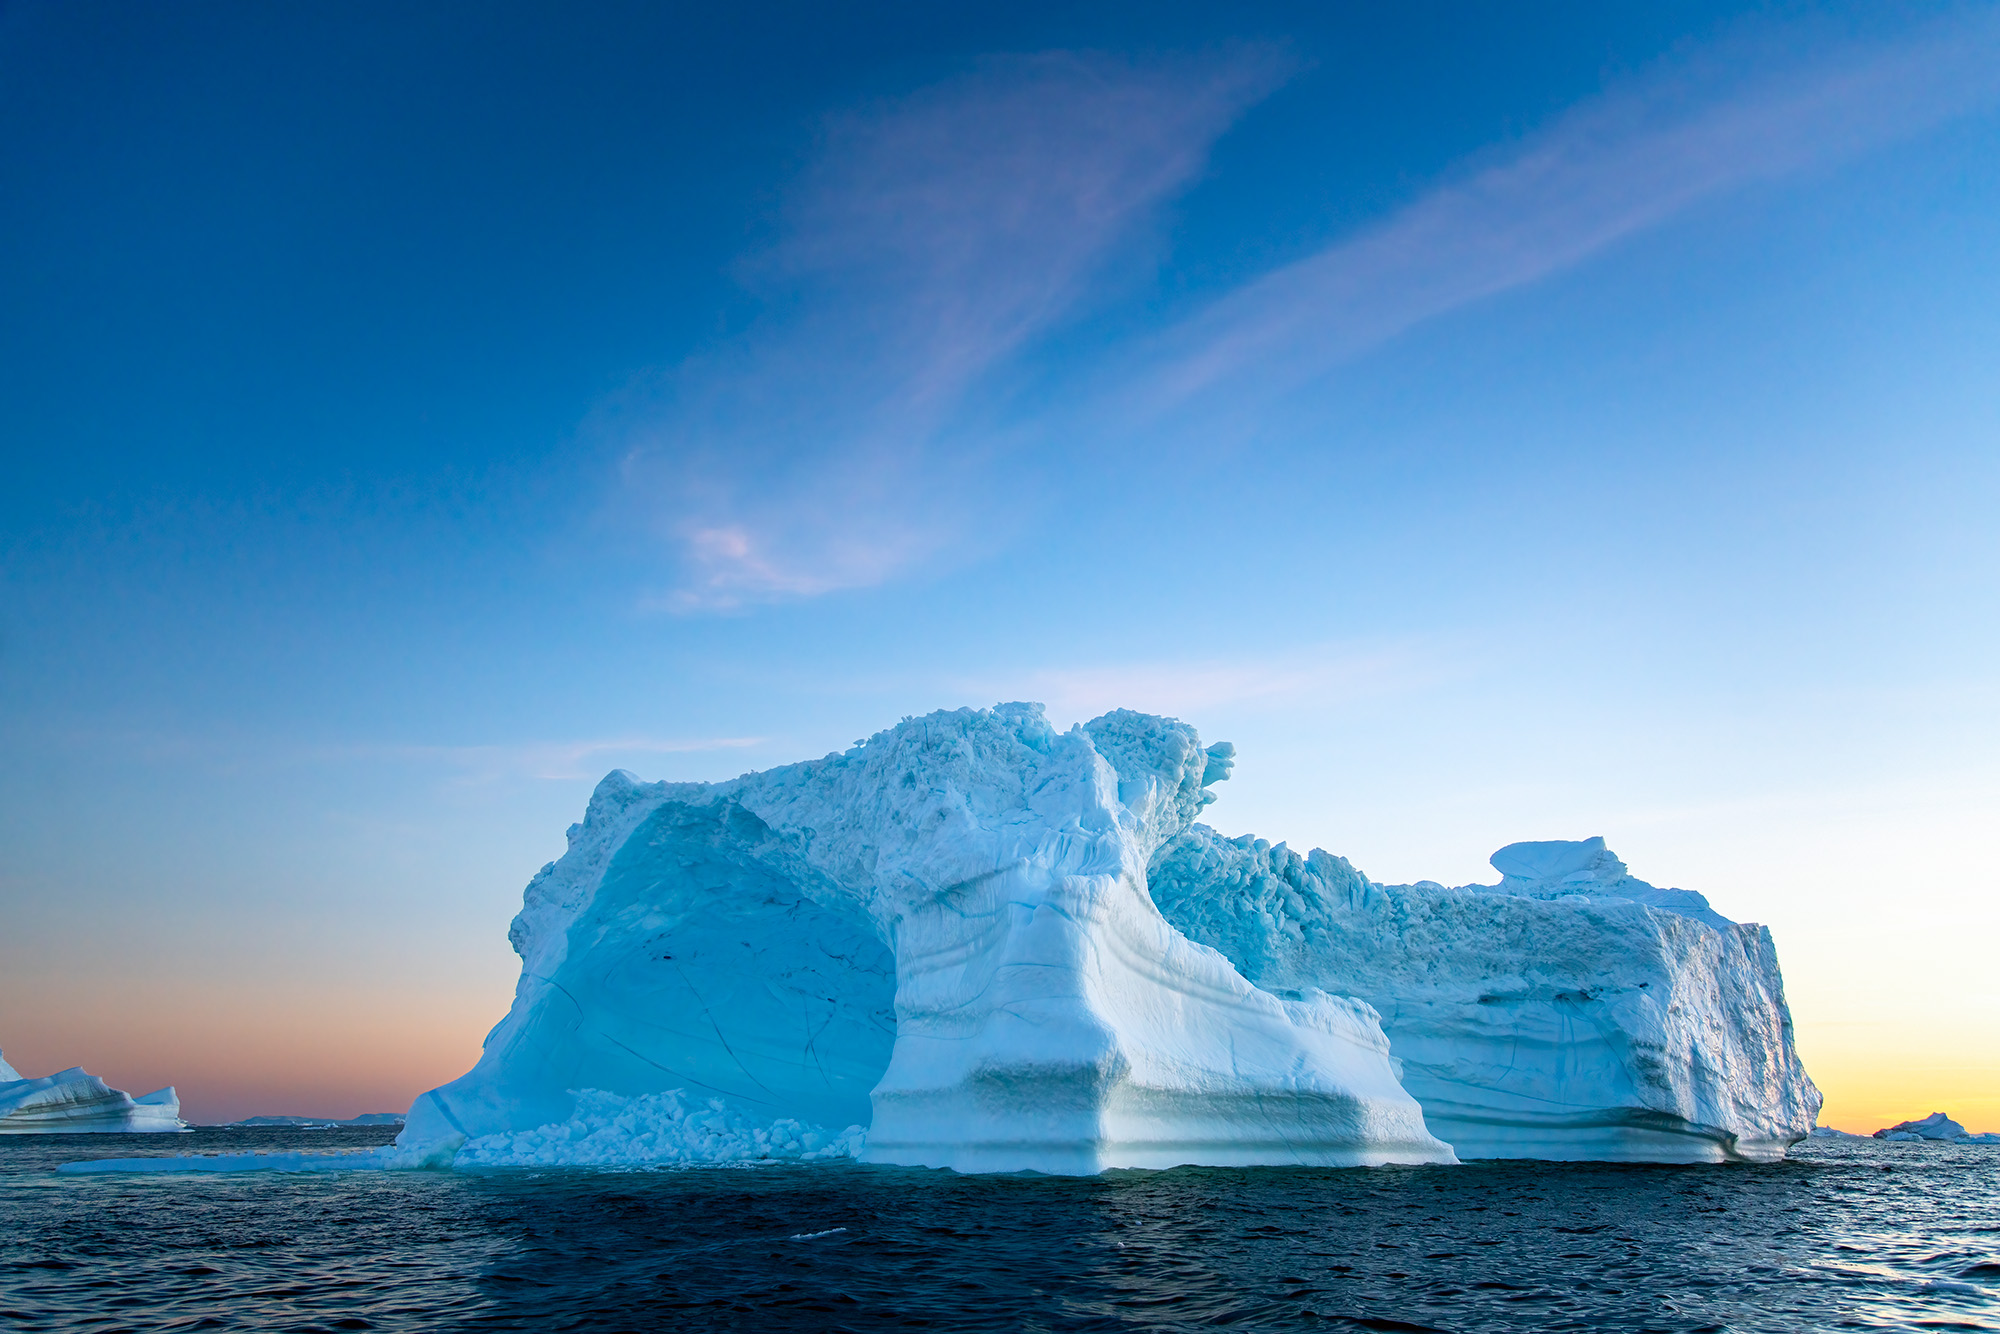 In this image, taken at 1:30 AM, the setting sun hovers on the horizon, casting its ethereal glow over an iceberg floating serenely...